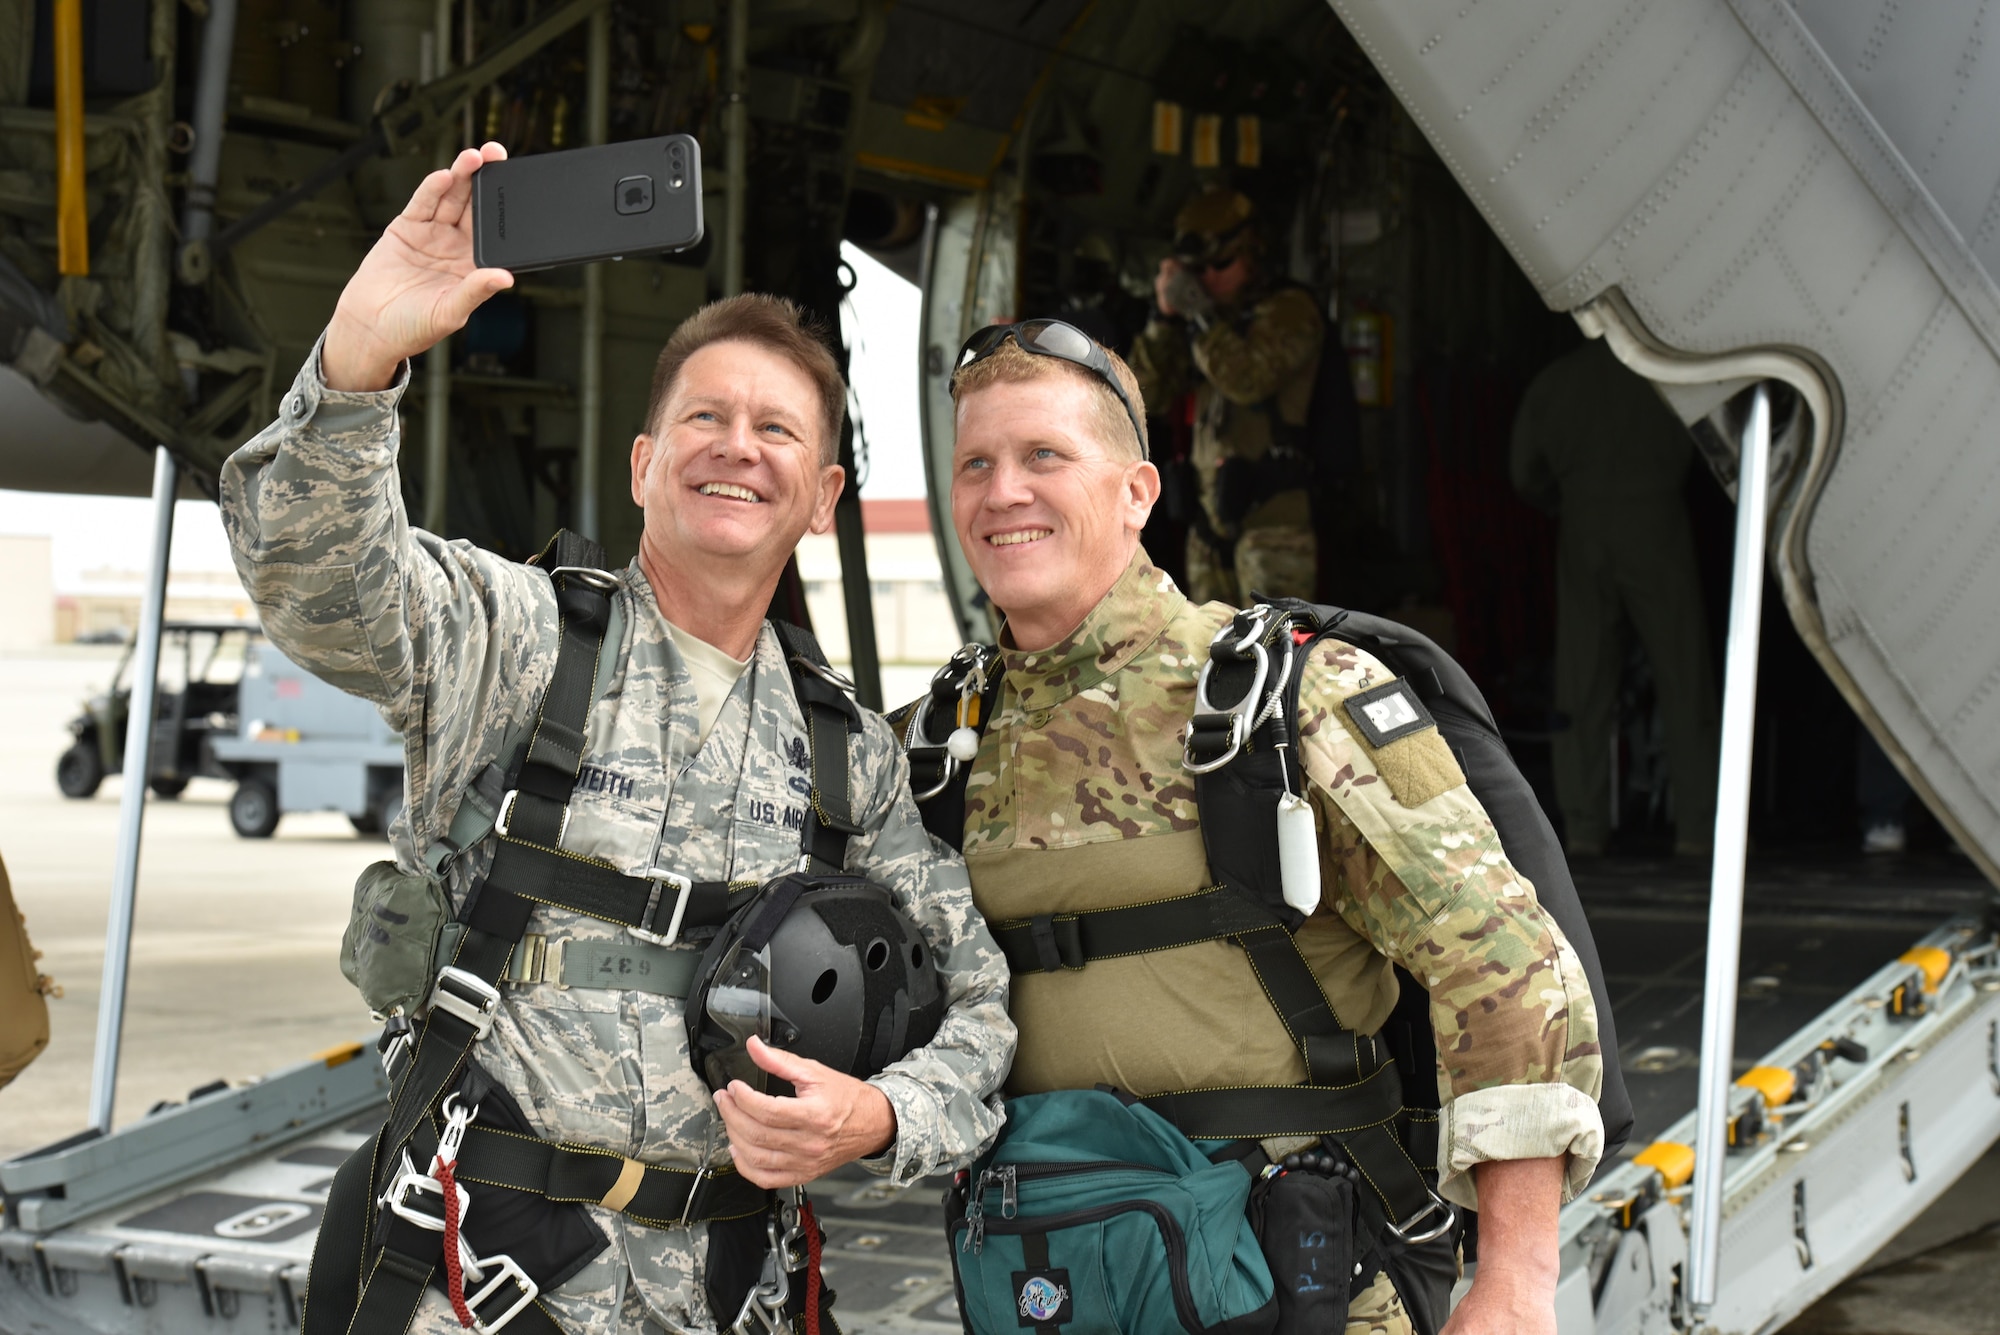 Brig. Gen. Wayne R. Monteith, 45th Space Wing commander, shoots a selfie with Chief Master Sgt. Mike Ziegler, pararescueman and senior enlisted member, 308th Rescue Squadron, June 8, 2017, prior to boarding a 920th Rescue Wing combat-search-and-rescue aircraft, where Ziegler will serve as the general's tandem jump master allowing him to skydive.  Leadership at both the 45th SW and the 920th RQW co-located at Patrick Air Force Base, Florida, agreed to demonstrate their commitment to mutual-support and shared resources in an unforgettable way. (U.S. Air Force photo / Senior Airman Brandon Kalloo Sanes)